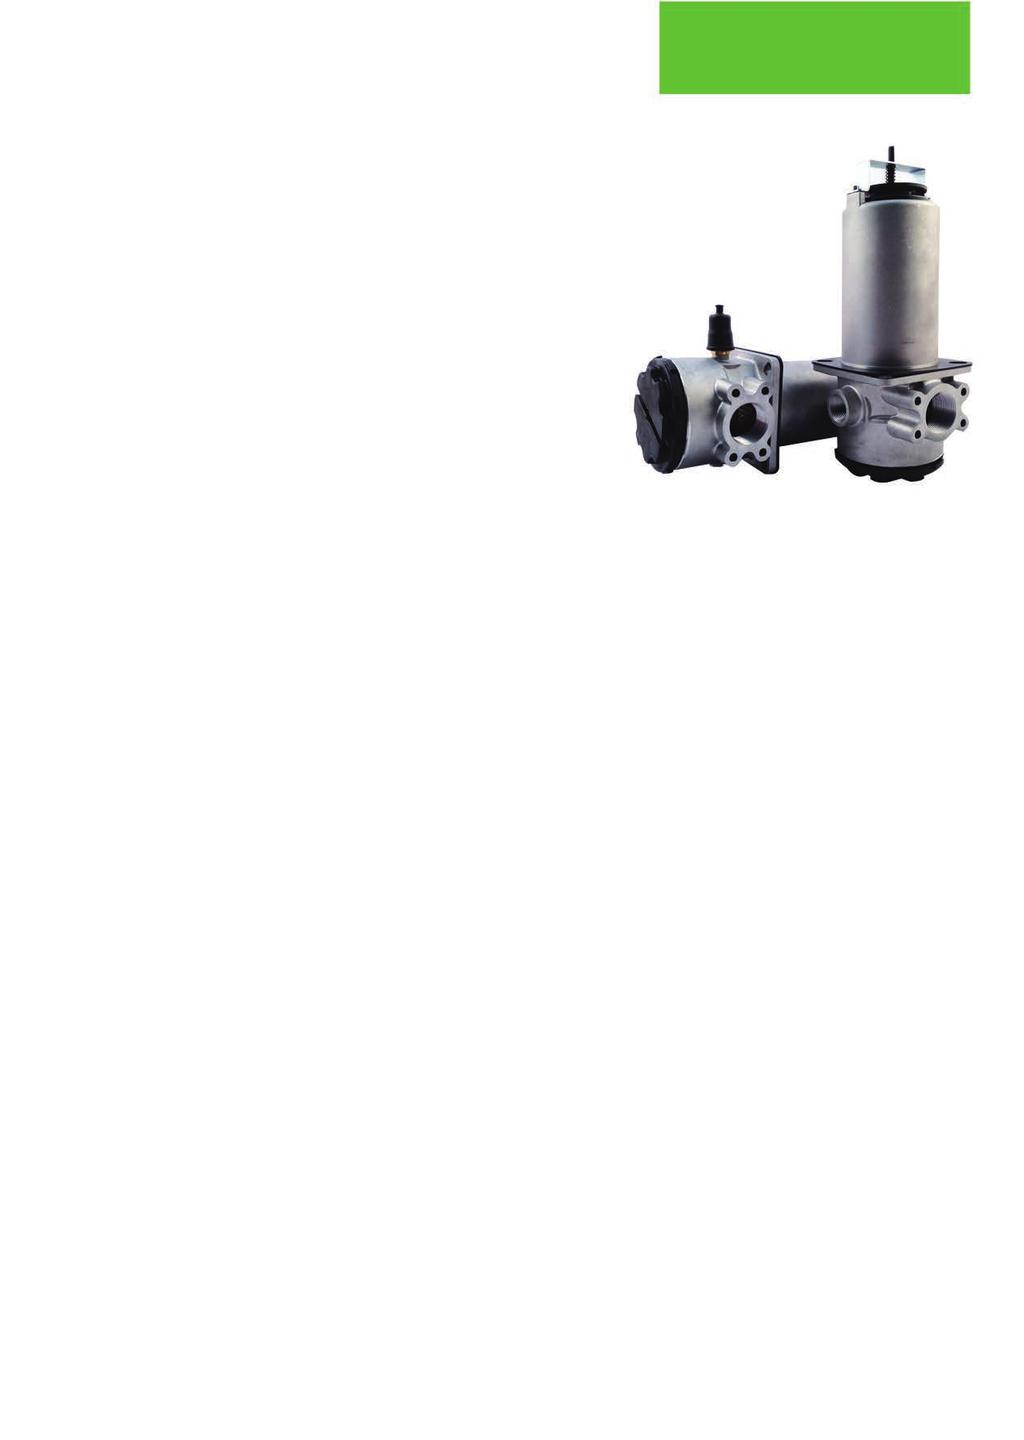 Common HYDRAULIC FILTRATION Side wall mounting suction filters Technical Information Connection Ports: 1-1 1/4-1 1/2 BSP (other thread options on request) 1 1/2 SAE J518-3000/M12